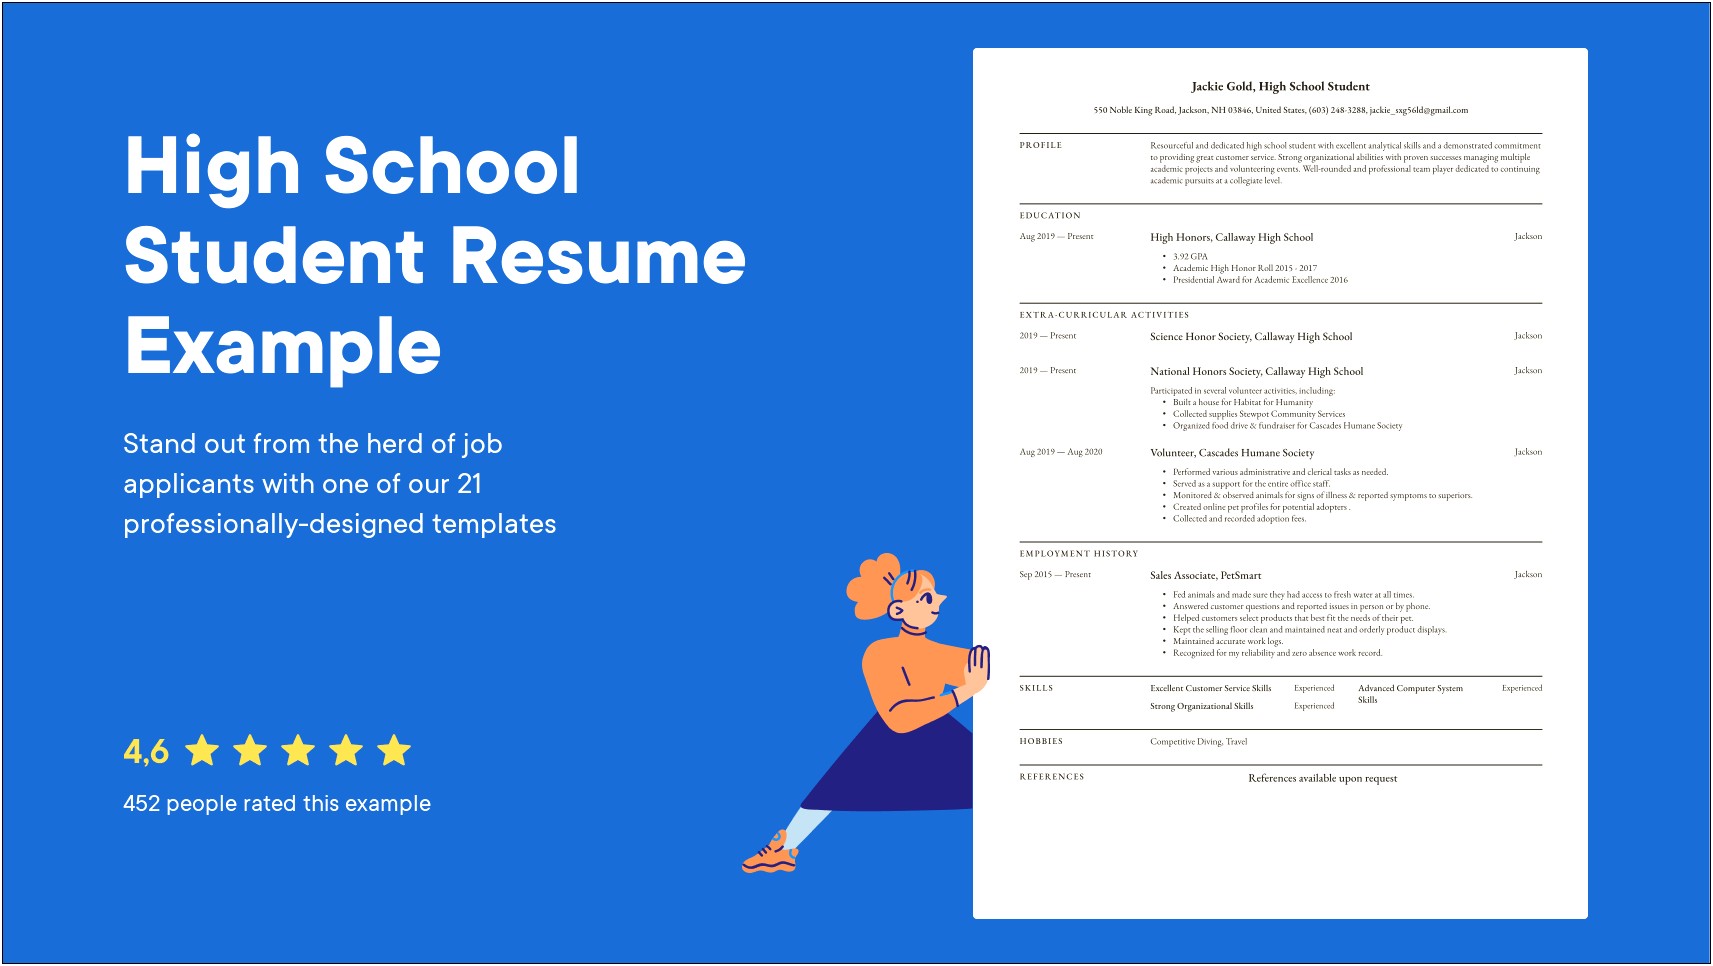 Example Of Resumes For Associate Lead For Petsmart